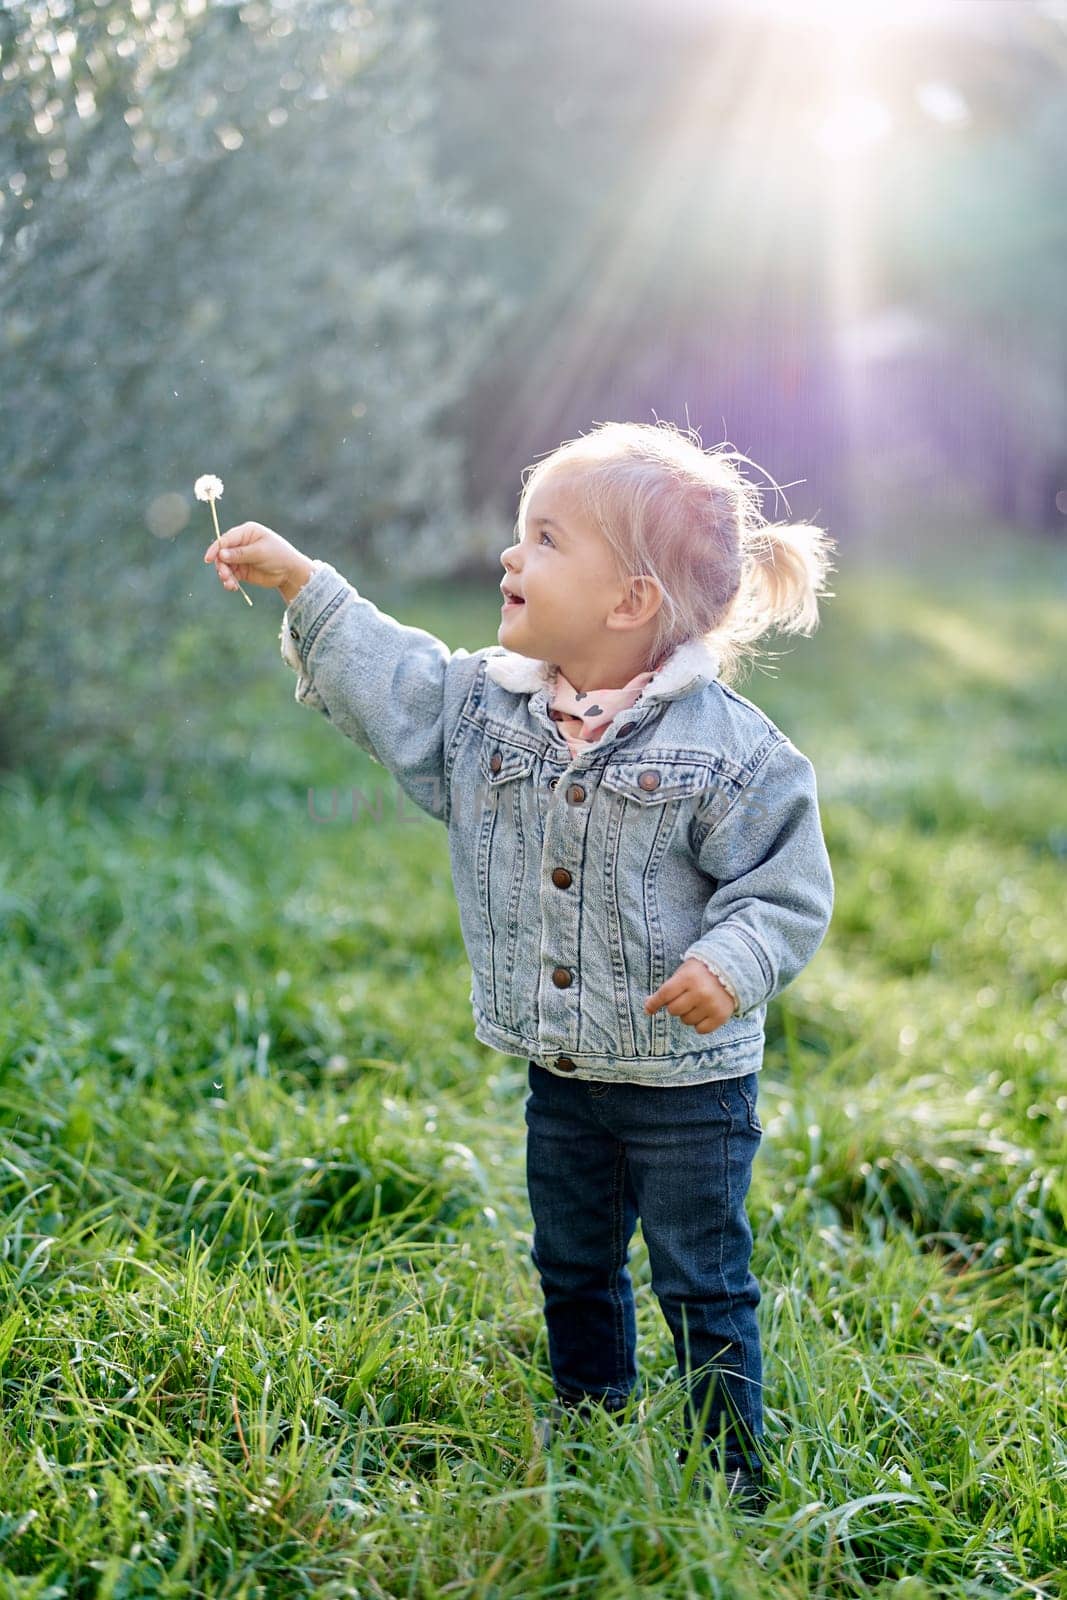 Little smiling girl stands in a sunny park and holds out a dandelion to the side. High quality photo